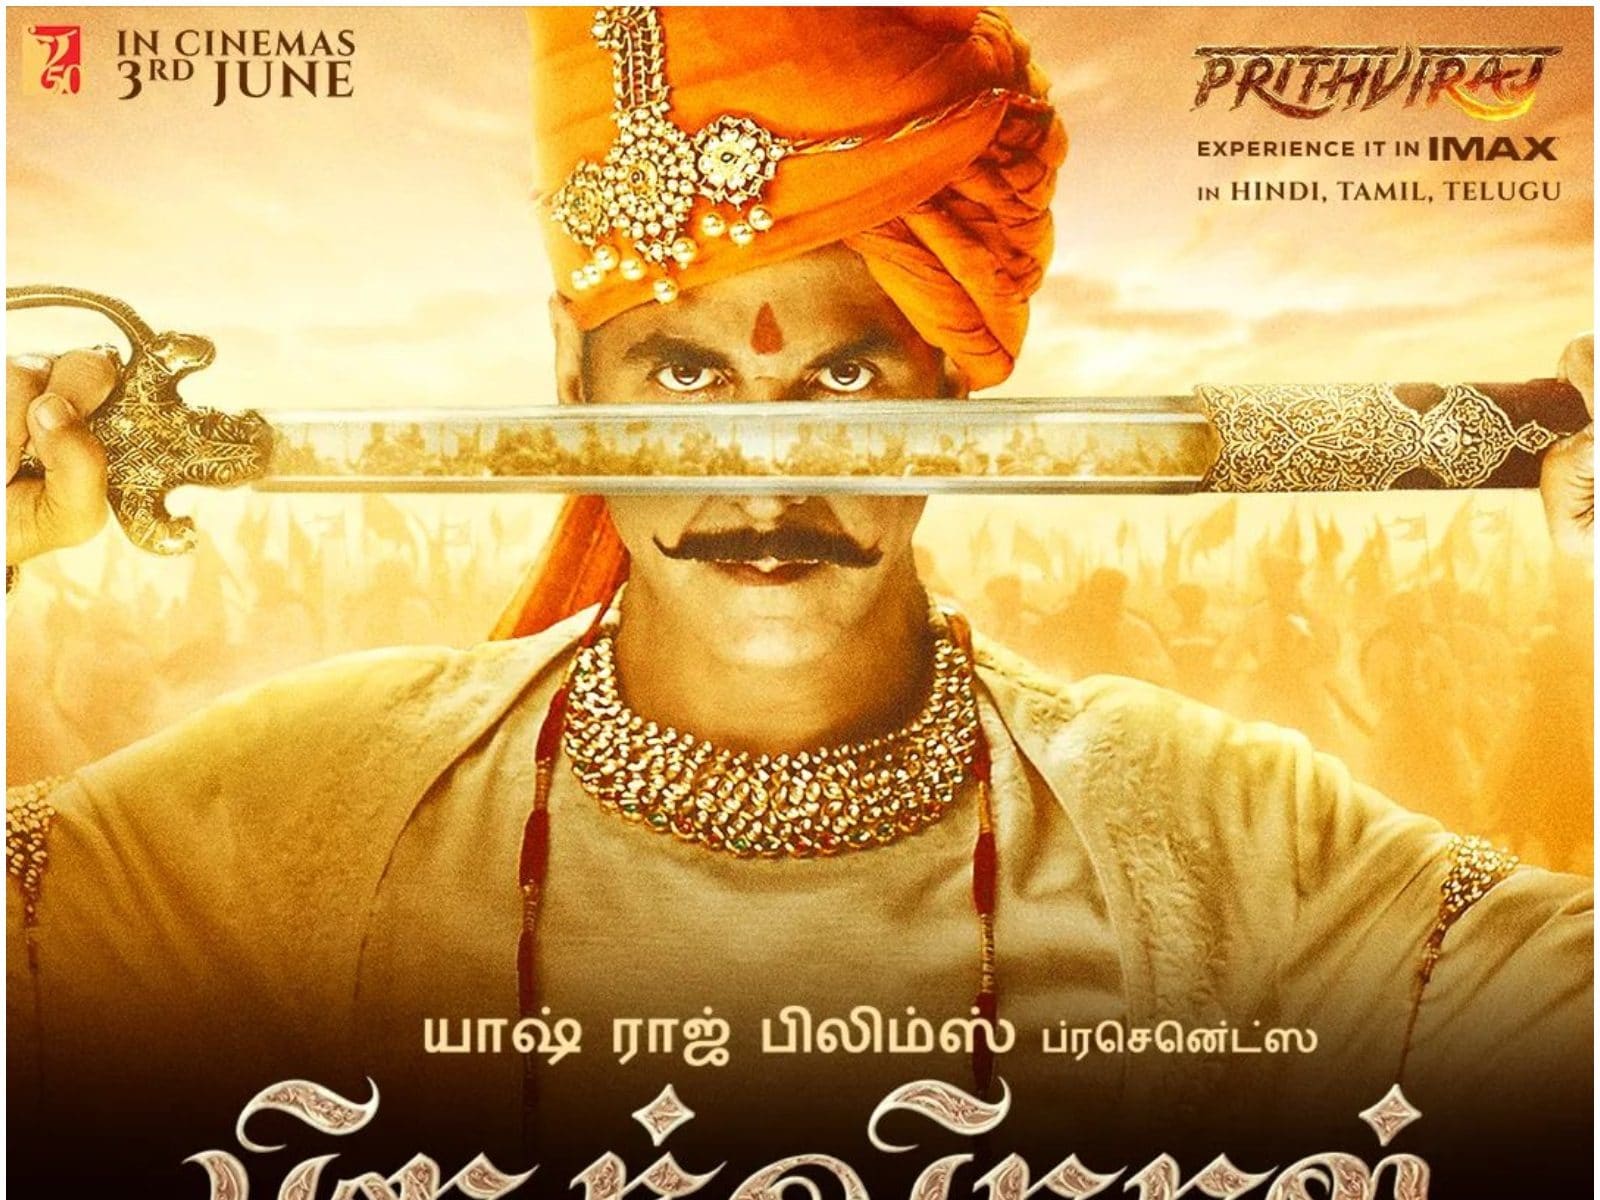 Akshay Kumar: Amazing to See How People Want to Know More About Samrat  Prithviraj Chauhan